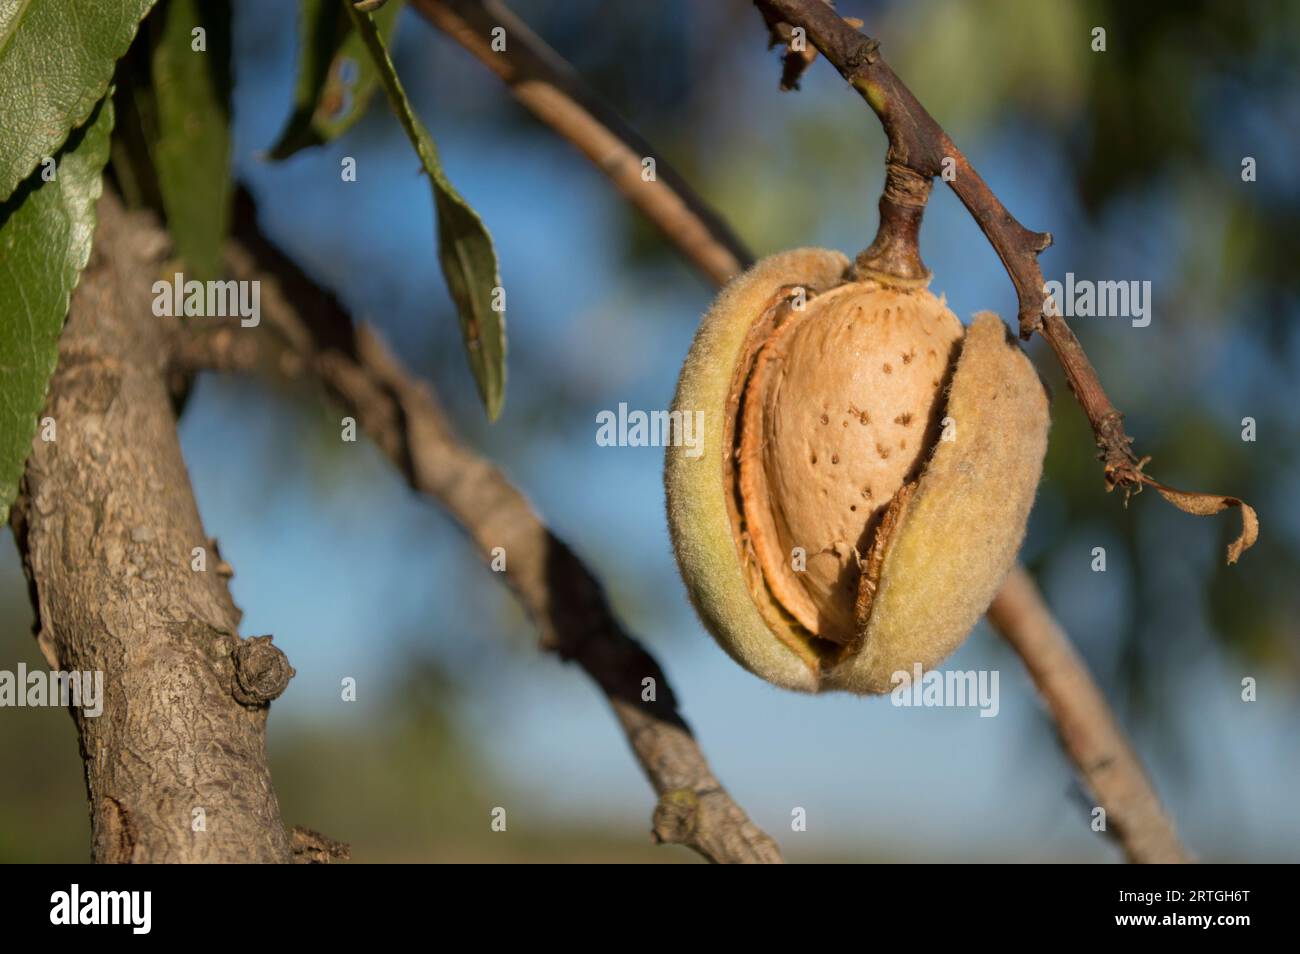 Ripe almond with shell on the almond tree Stock Photo